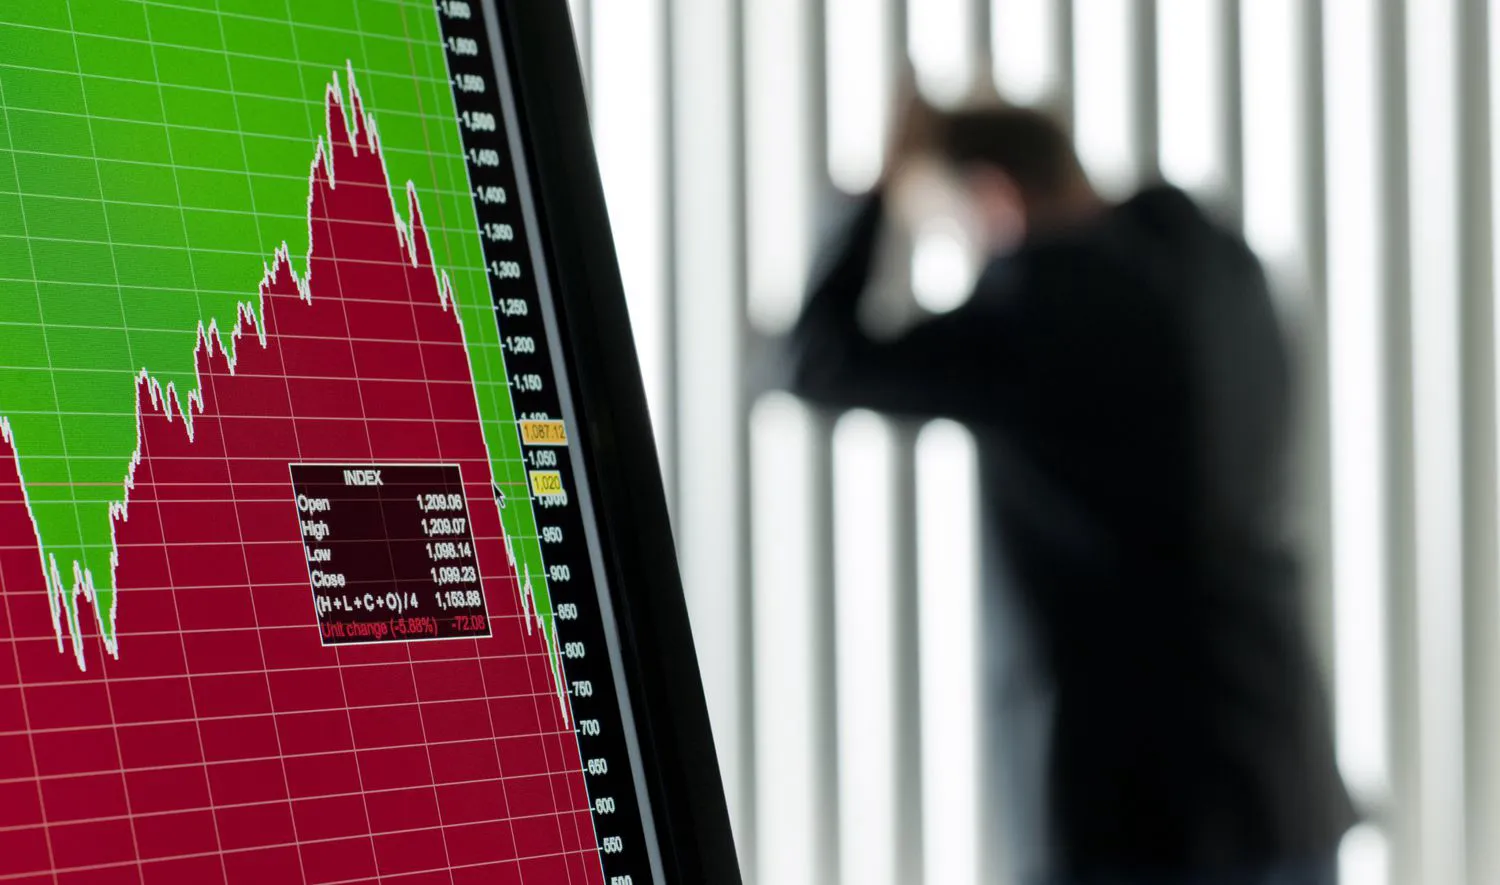 a plummeting stock screen on a computer monitor with a worried margin trader in the background leaning against a window